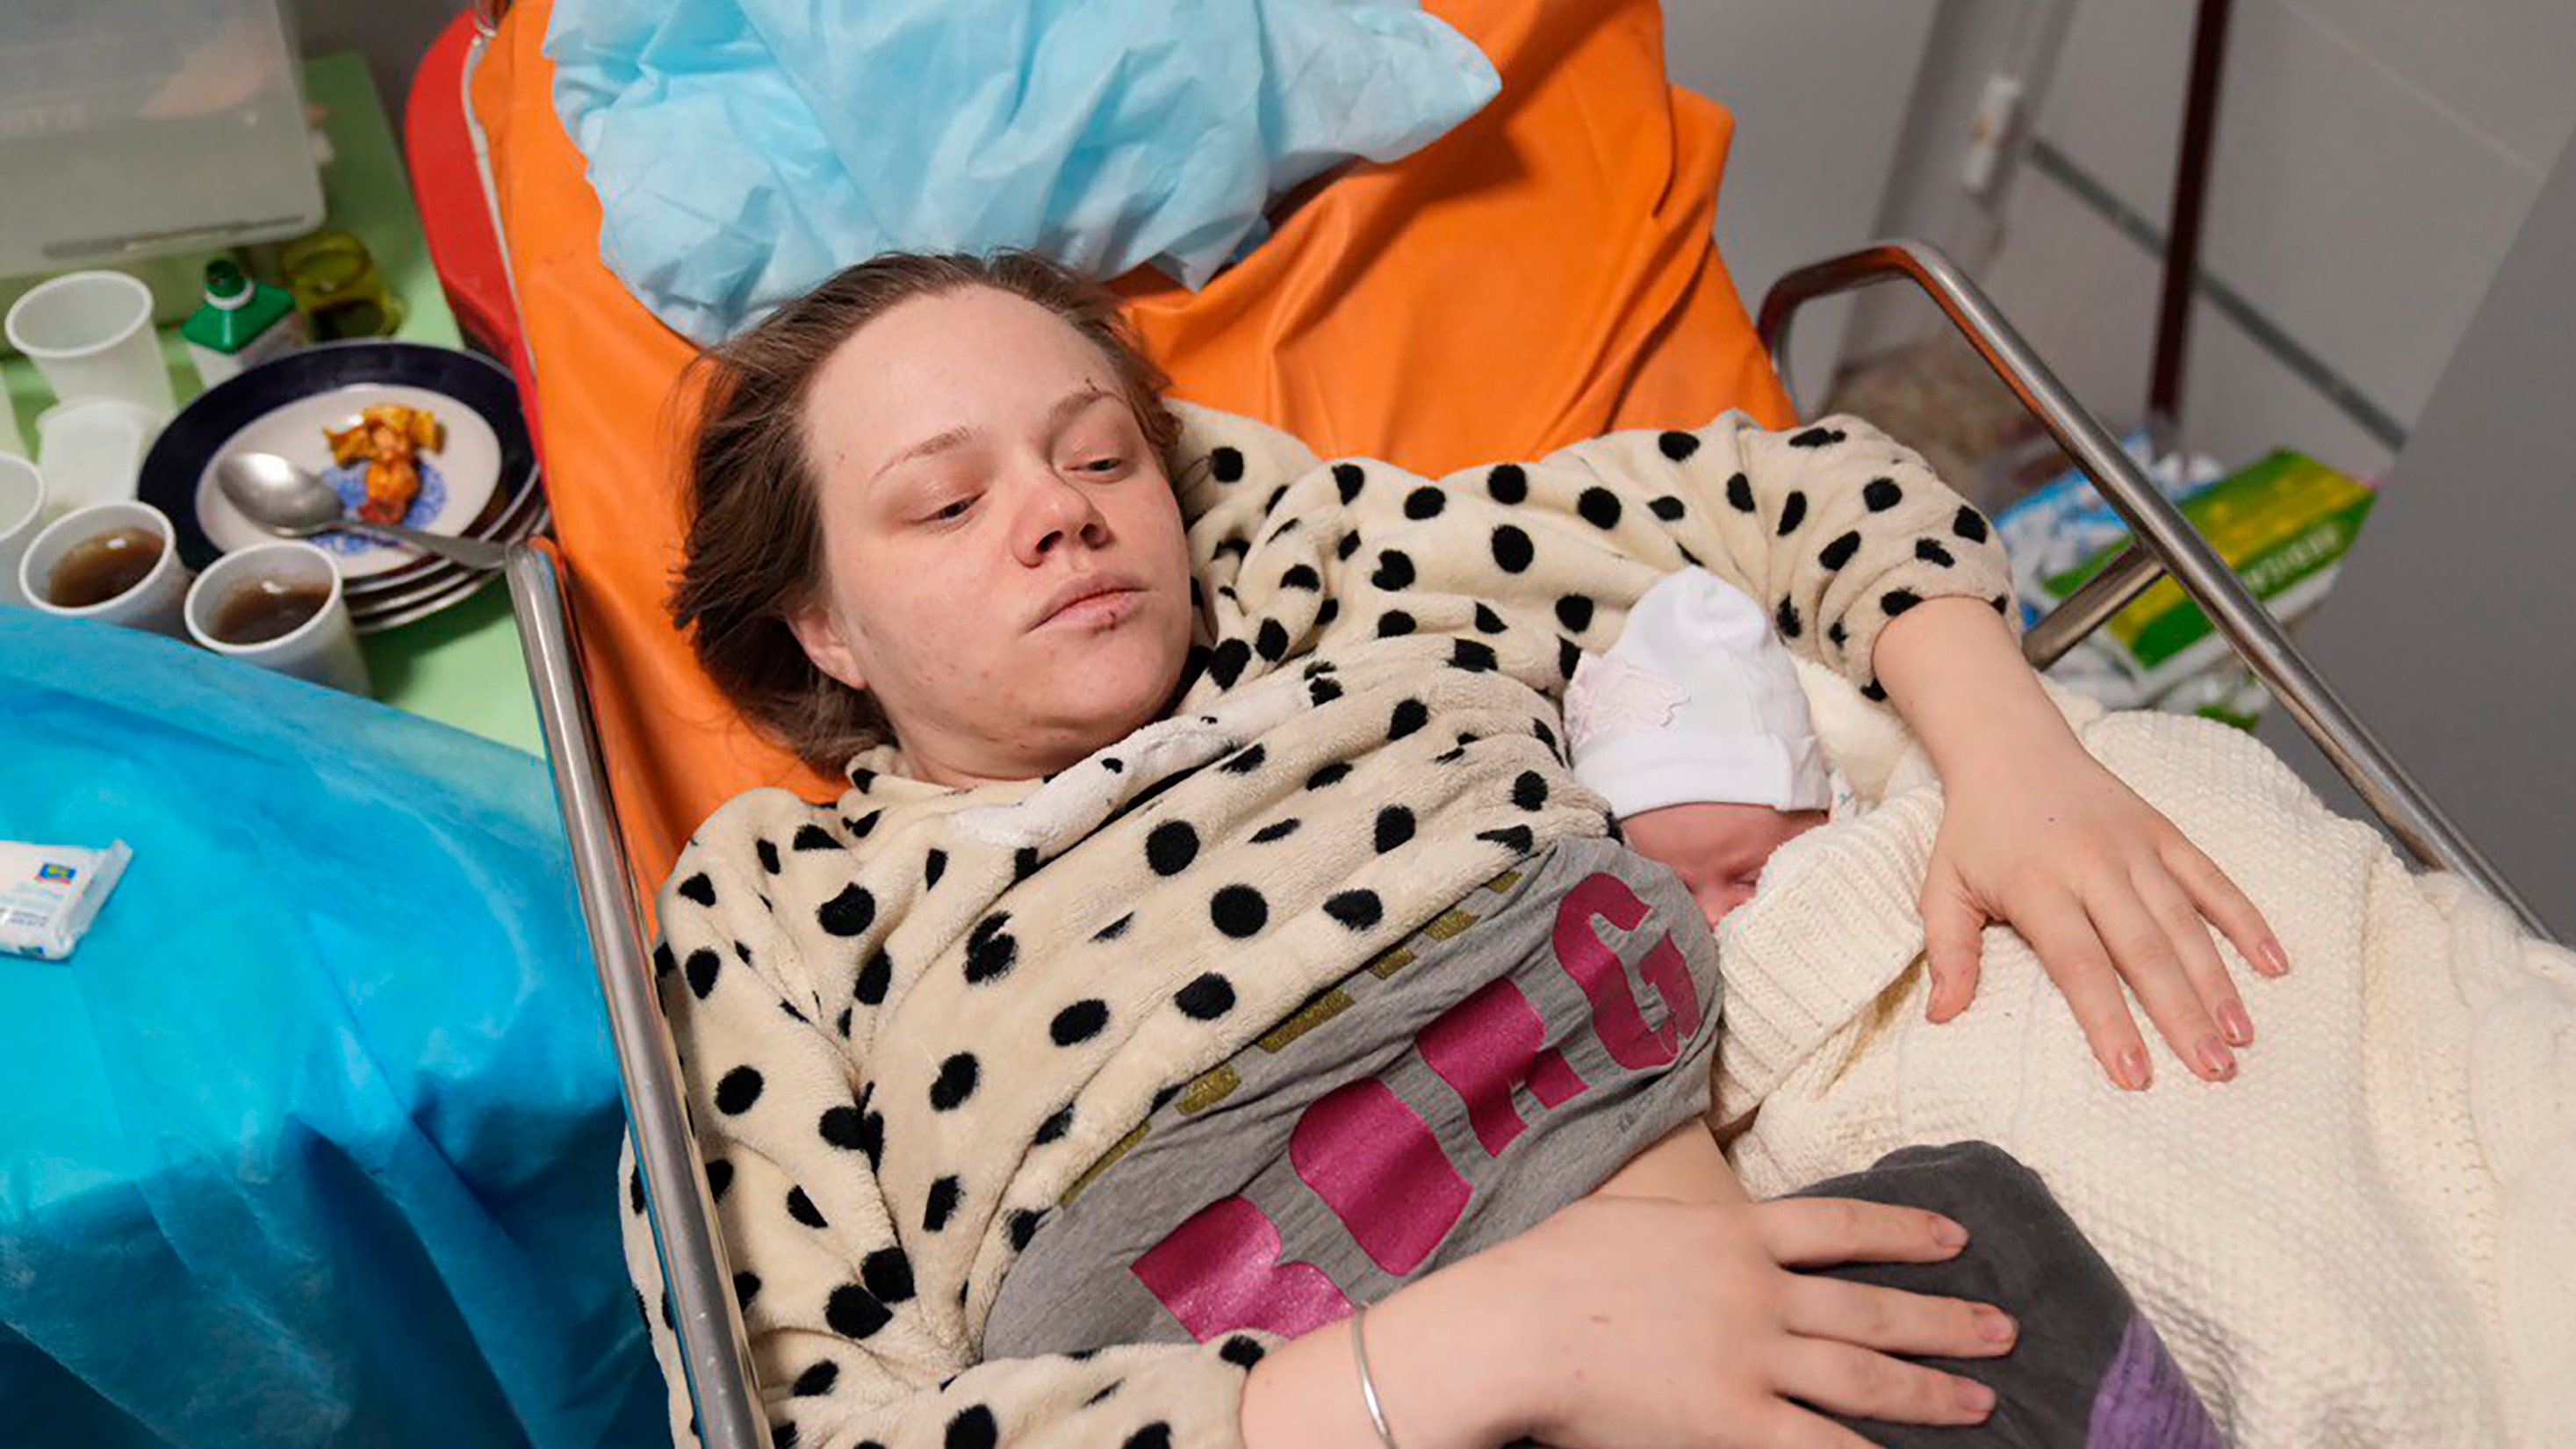 Ukrainian woman who survived hospital bombing gives birth to baby girl